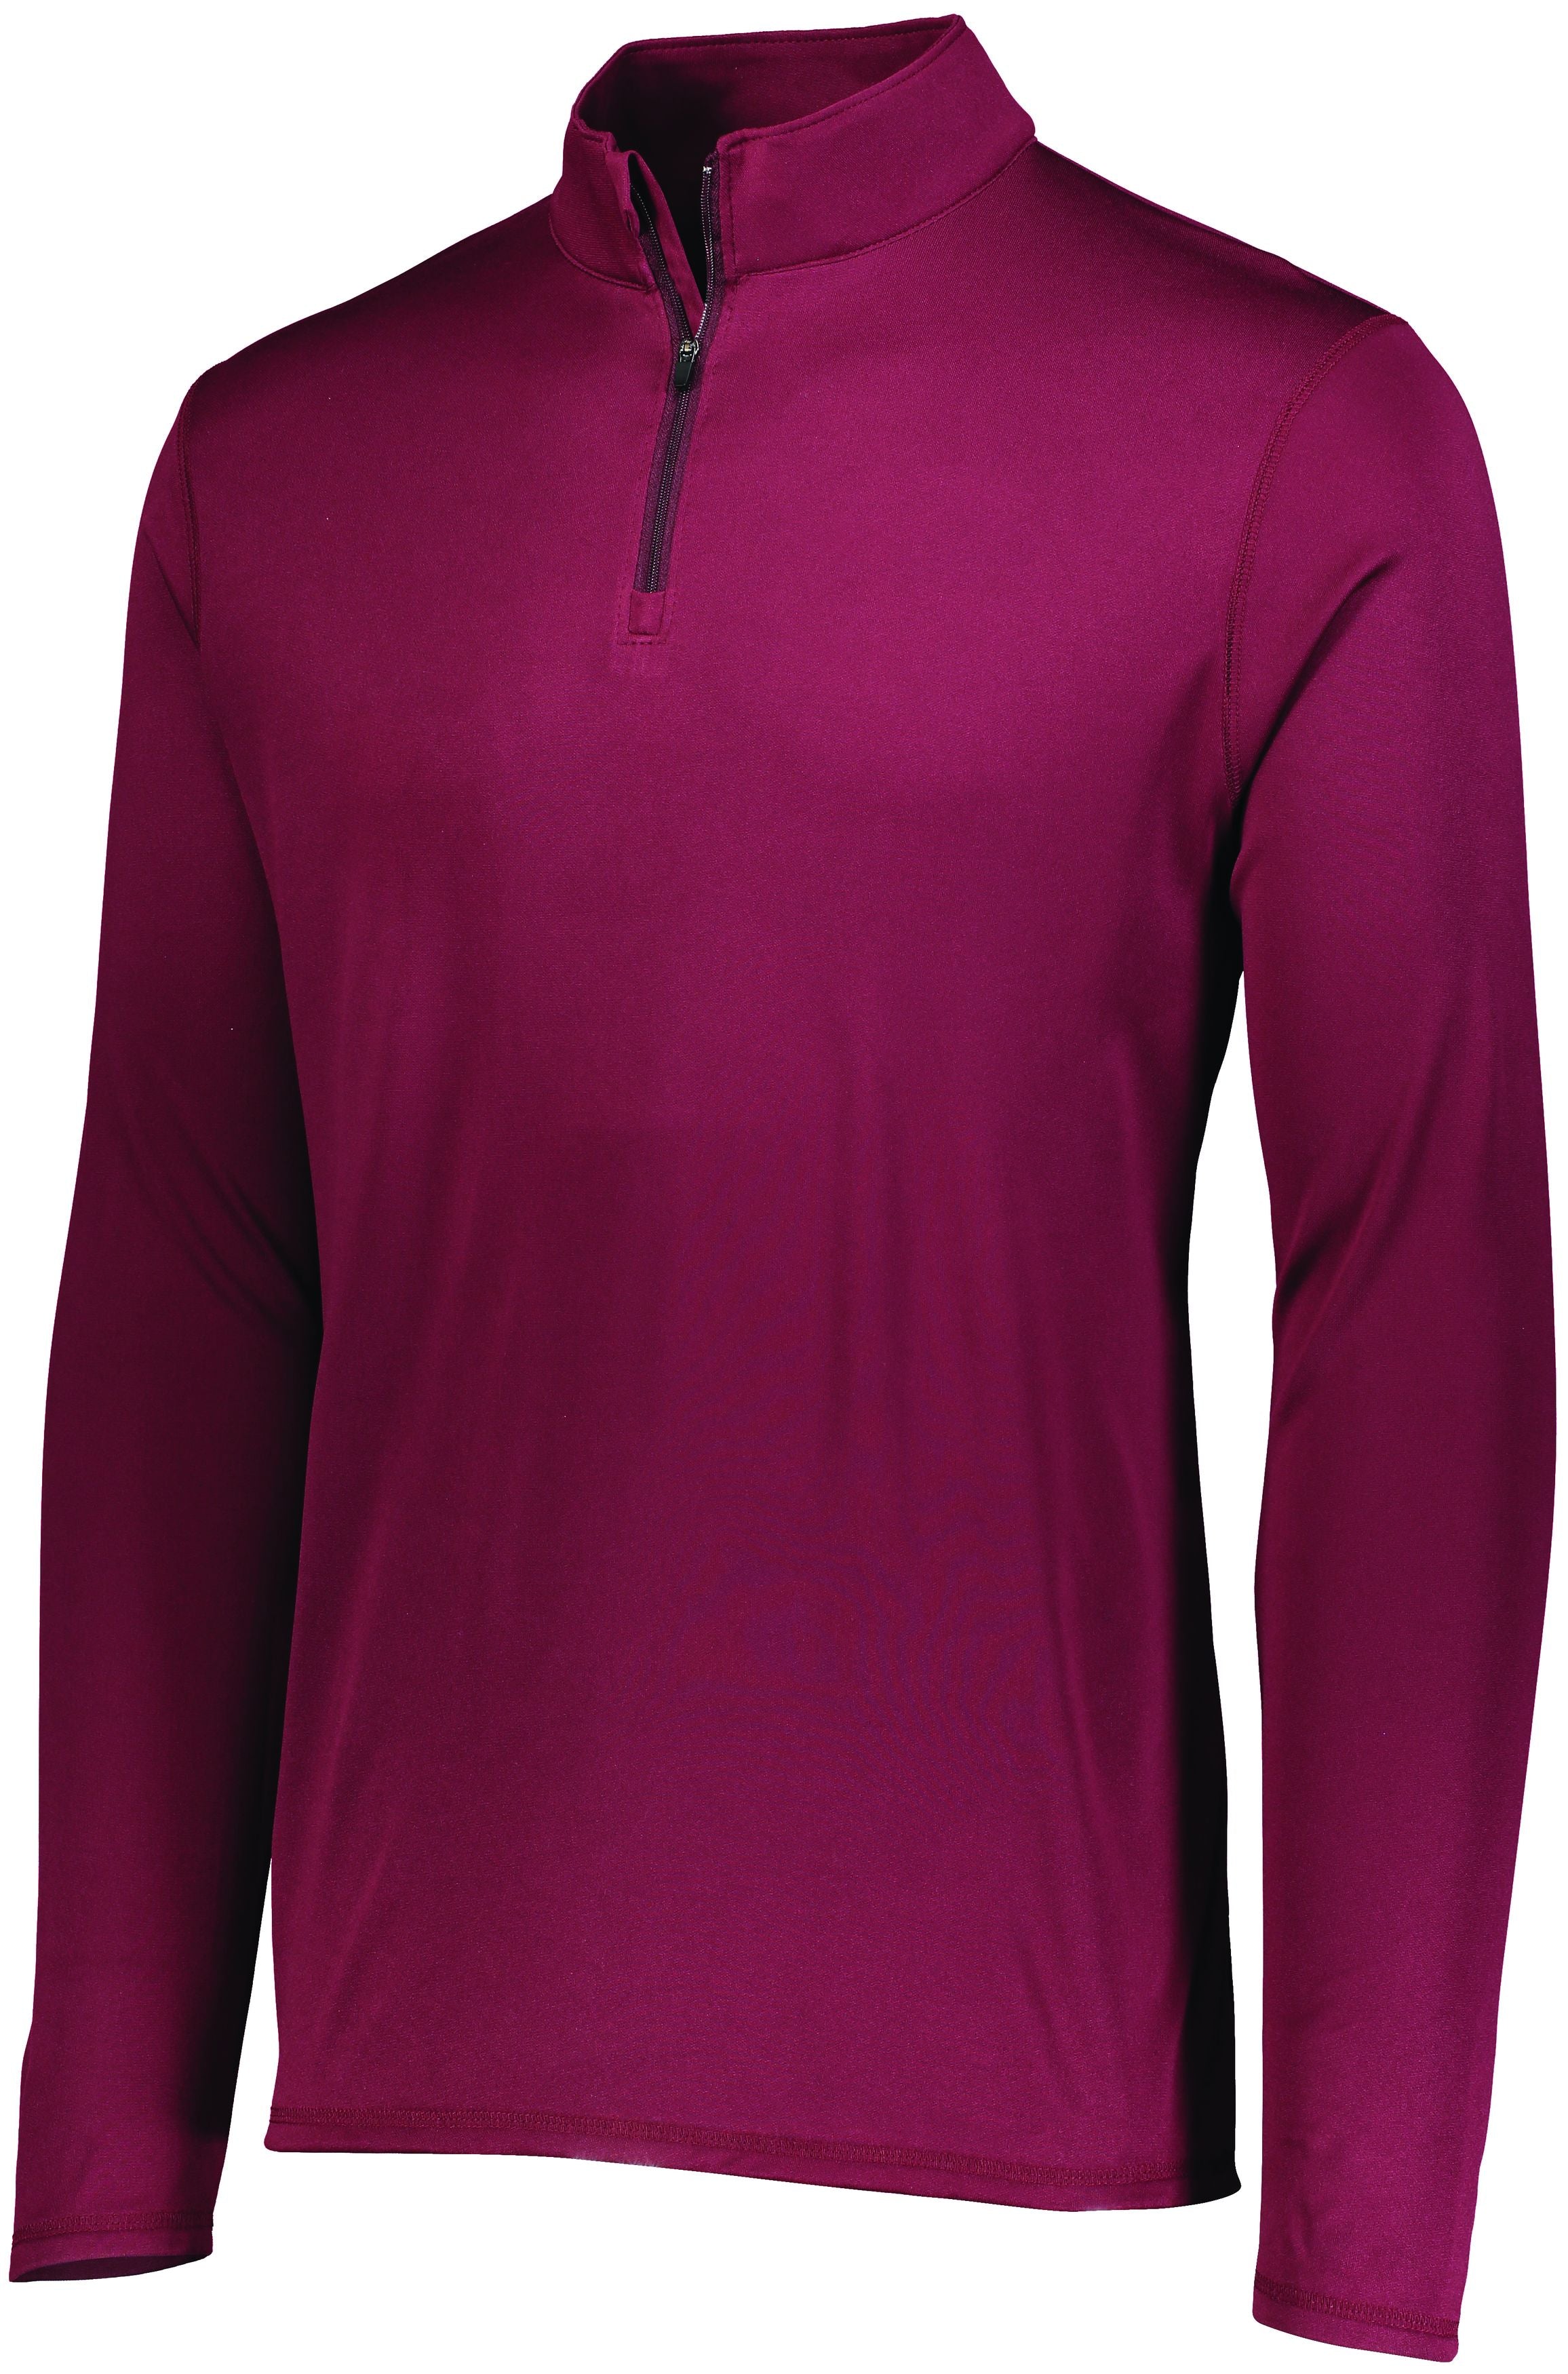 Augusta Sportswear Attain Wicking 1/4 Zip Pullover in Maroon  -Part of the Adult, Adult-Pullover, Augusta-Products, Outerwear product lines at KanaleyCreations.com